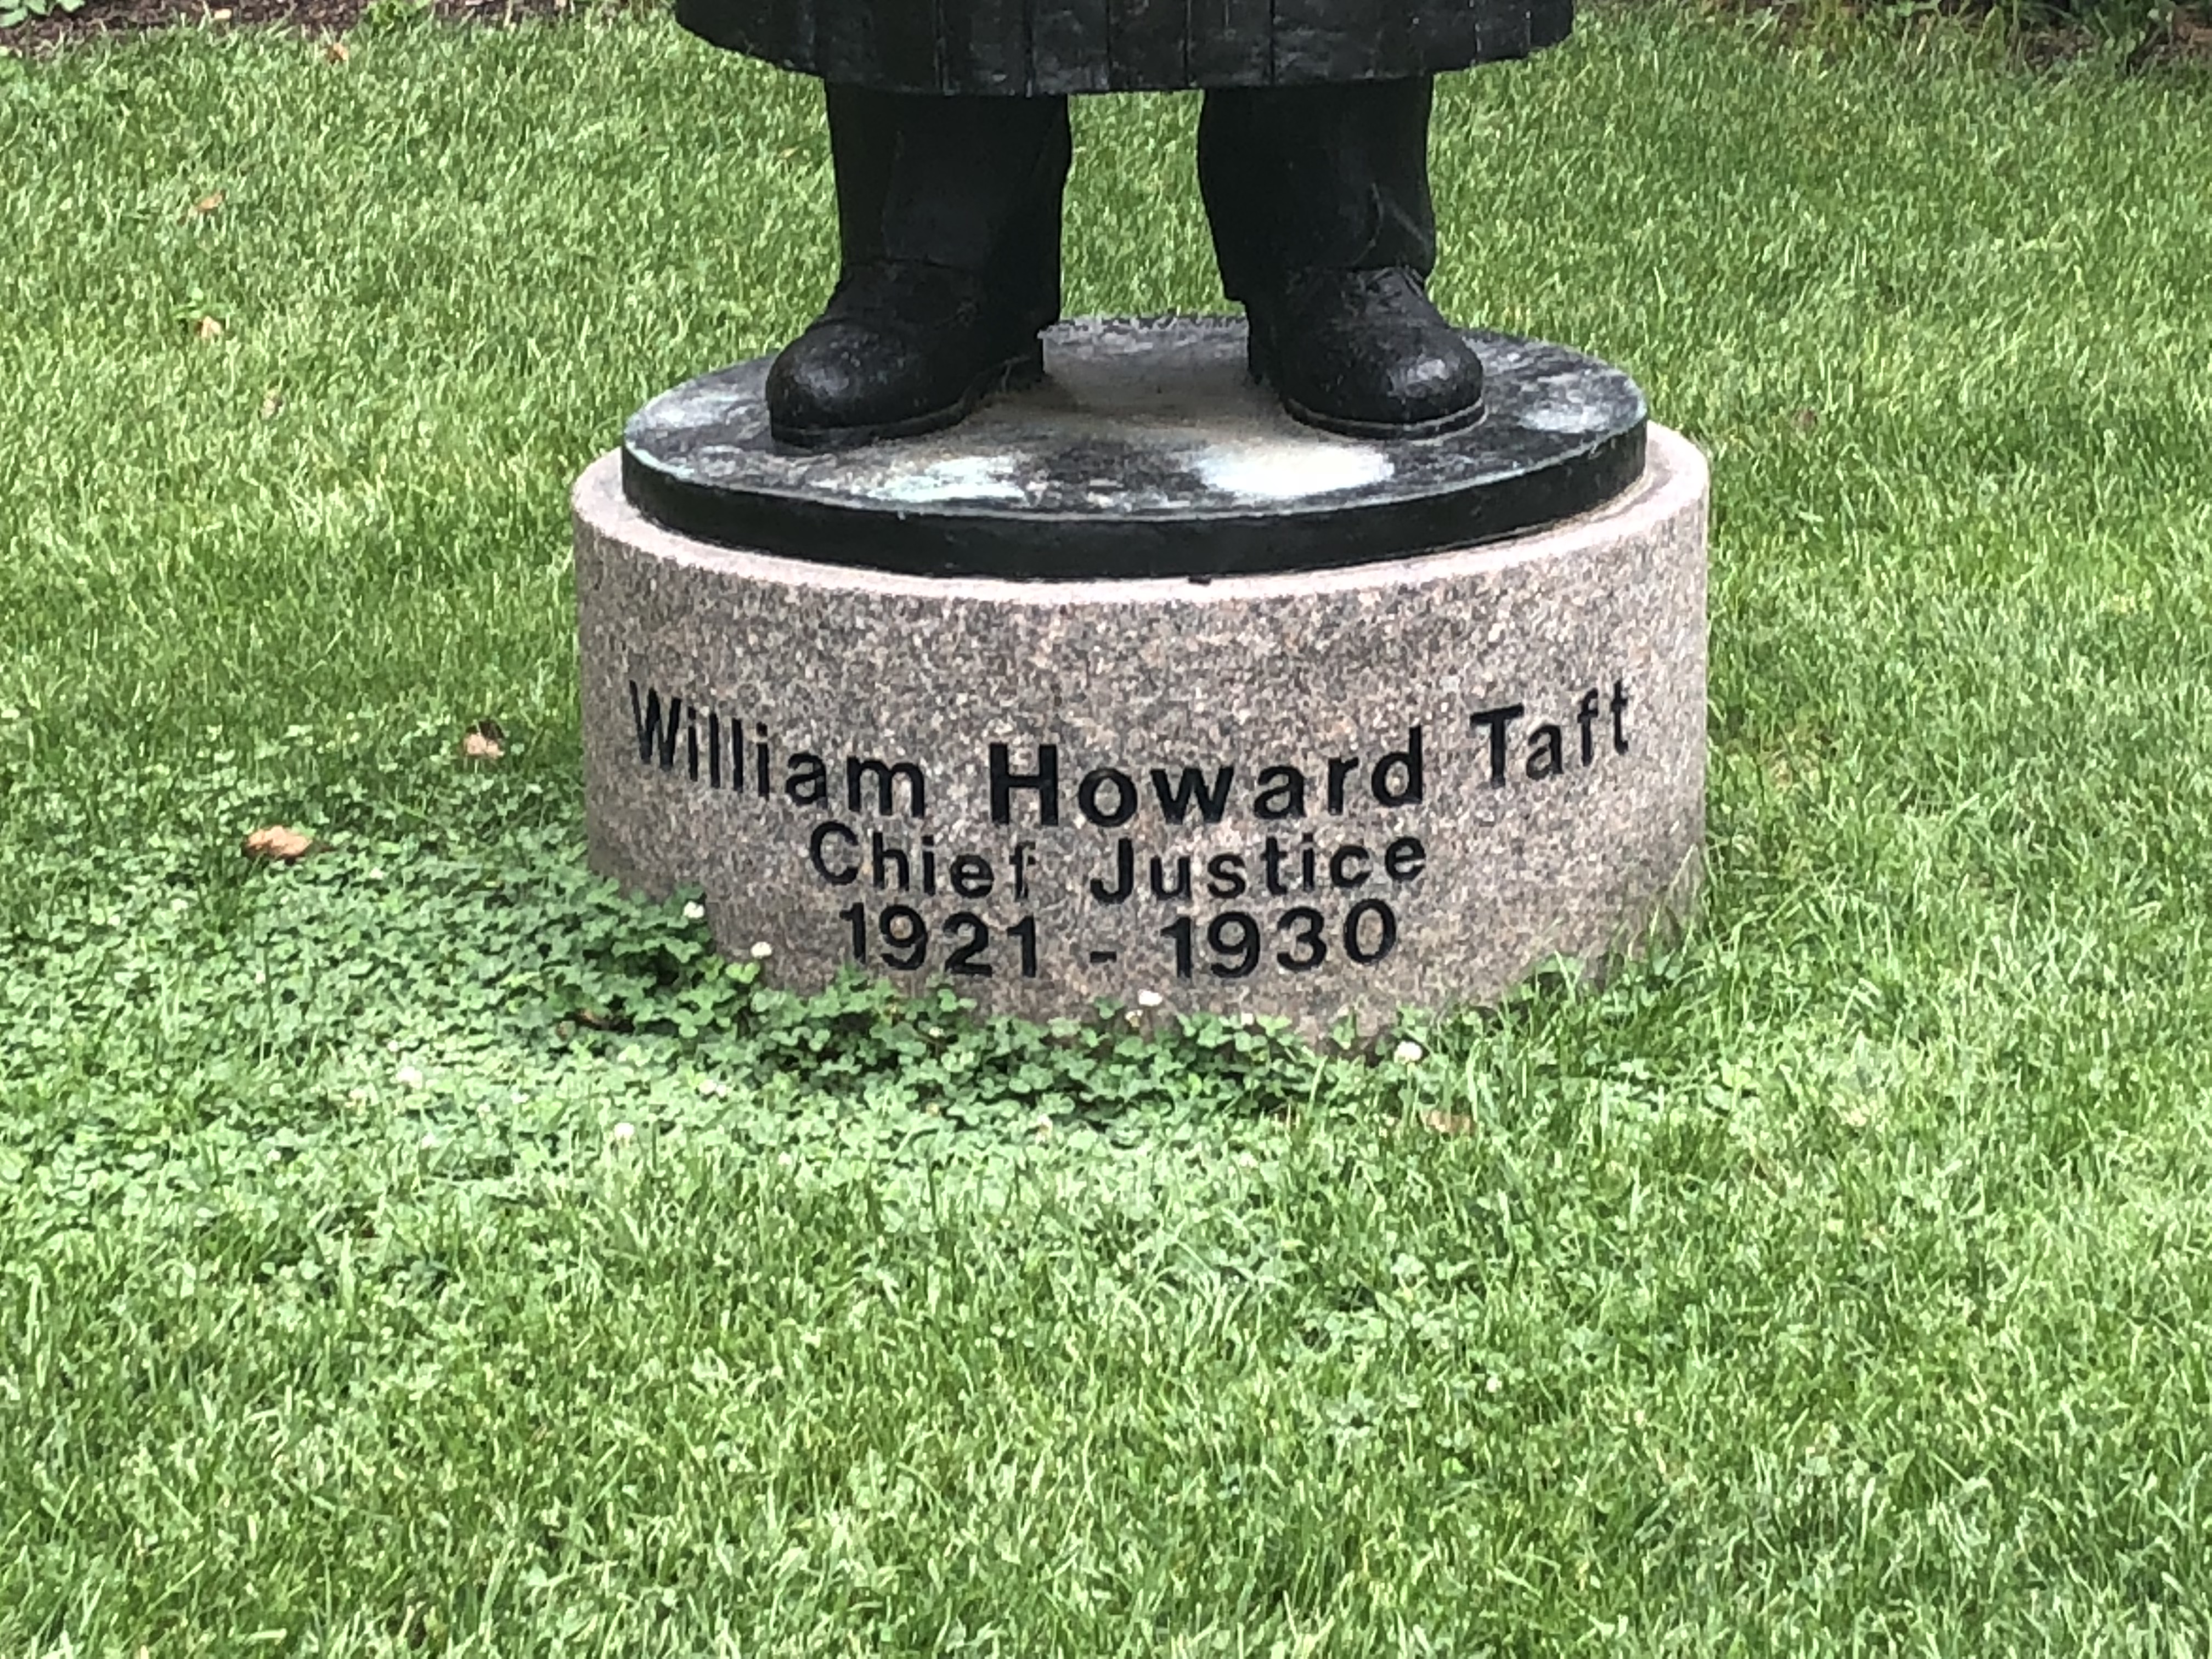 Photograph of base of William Howard Taft statue in grass.